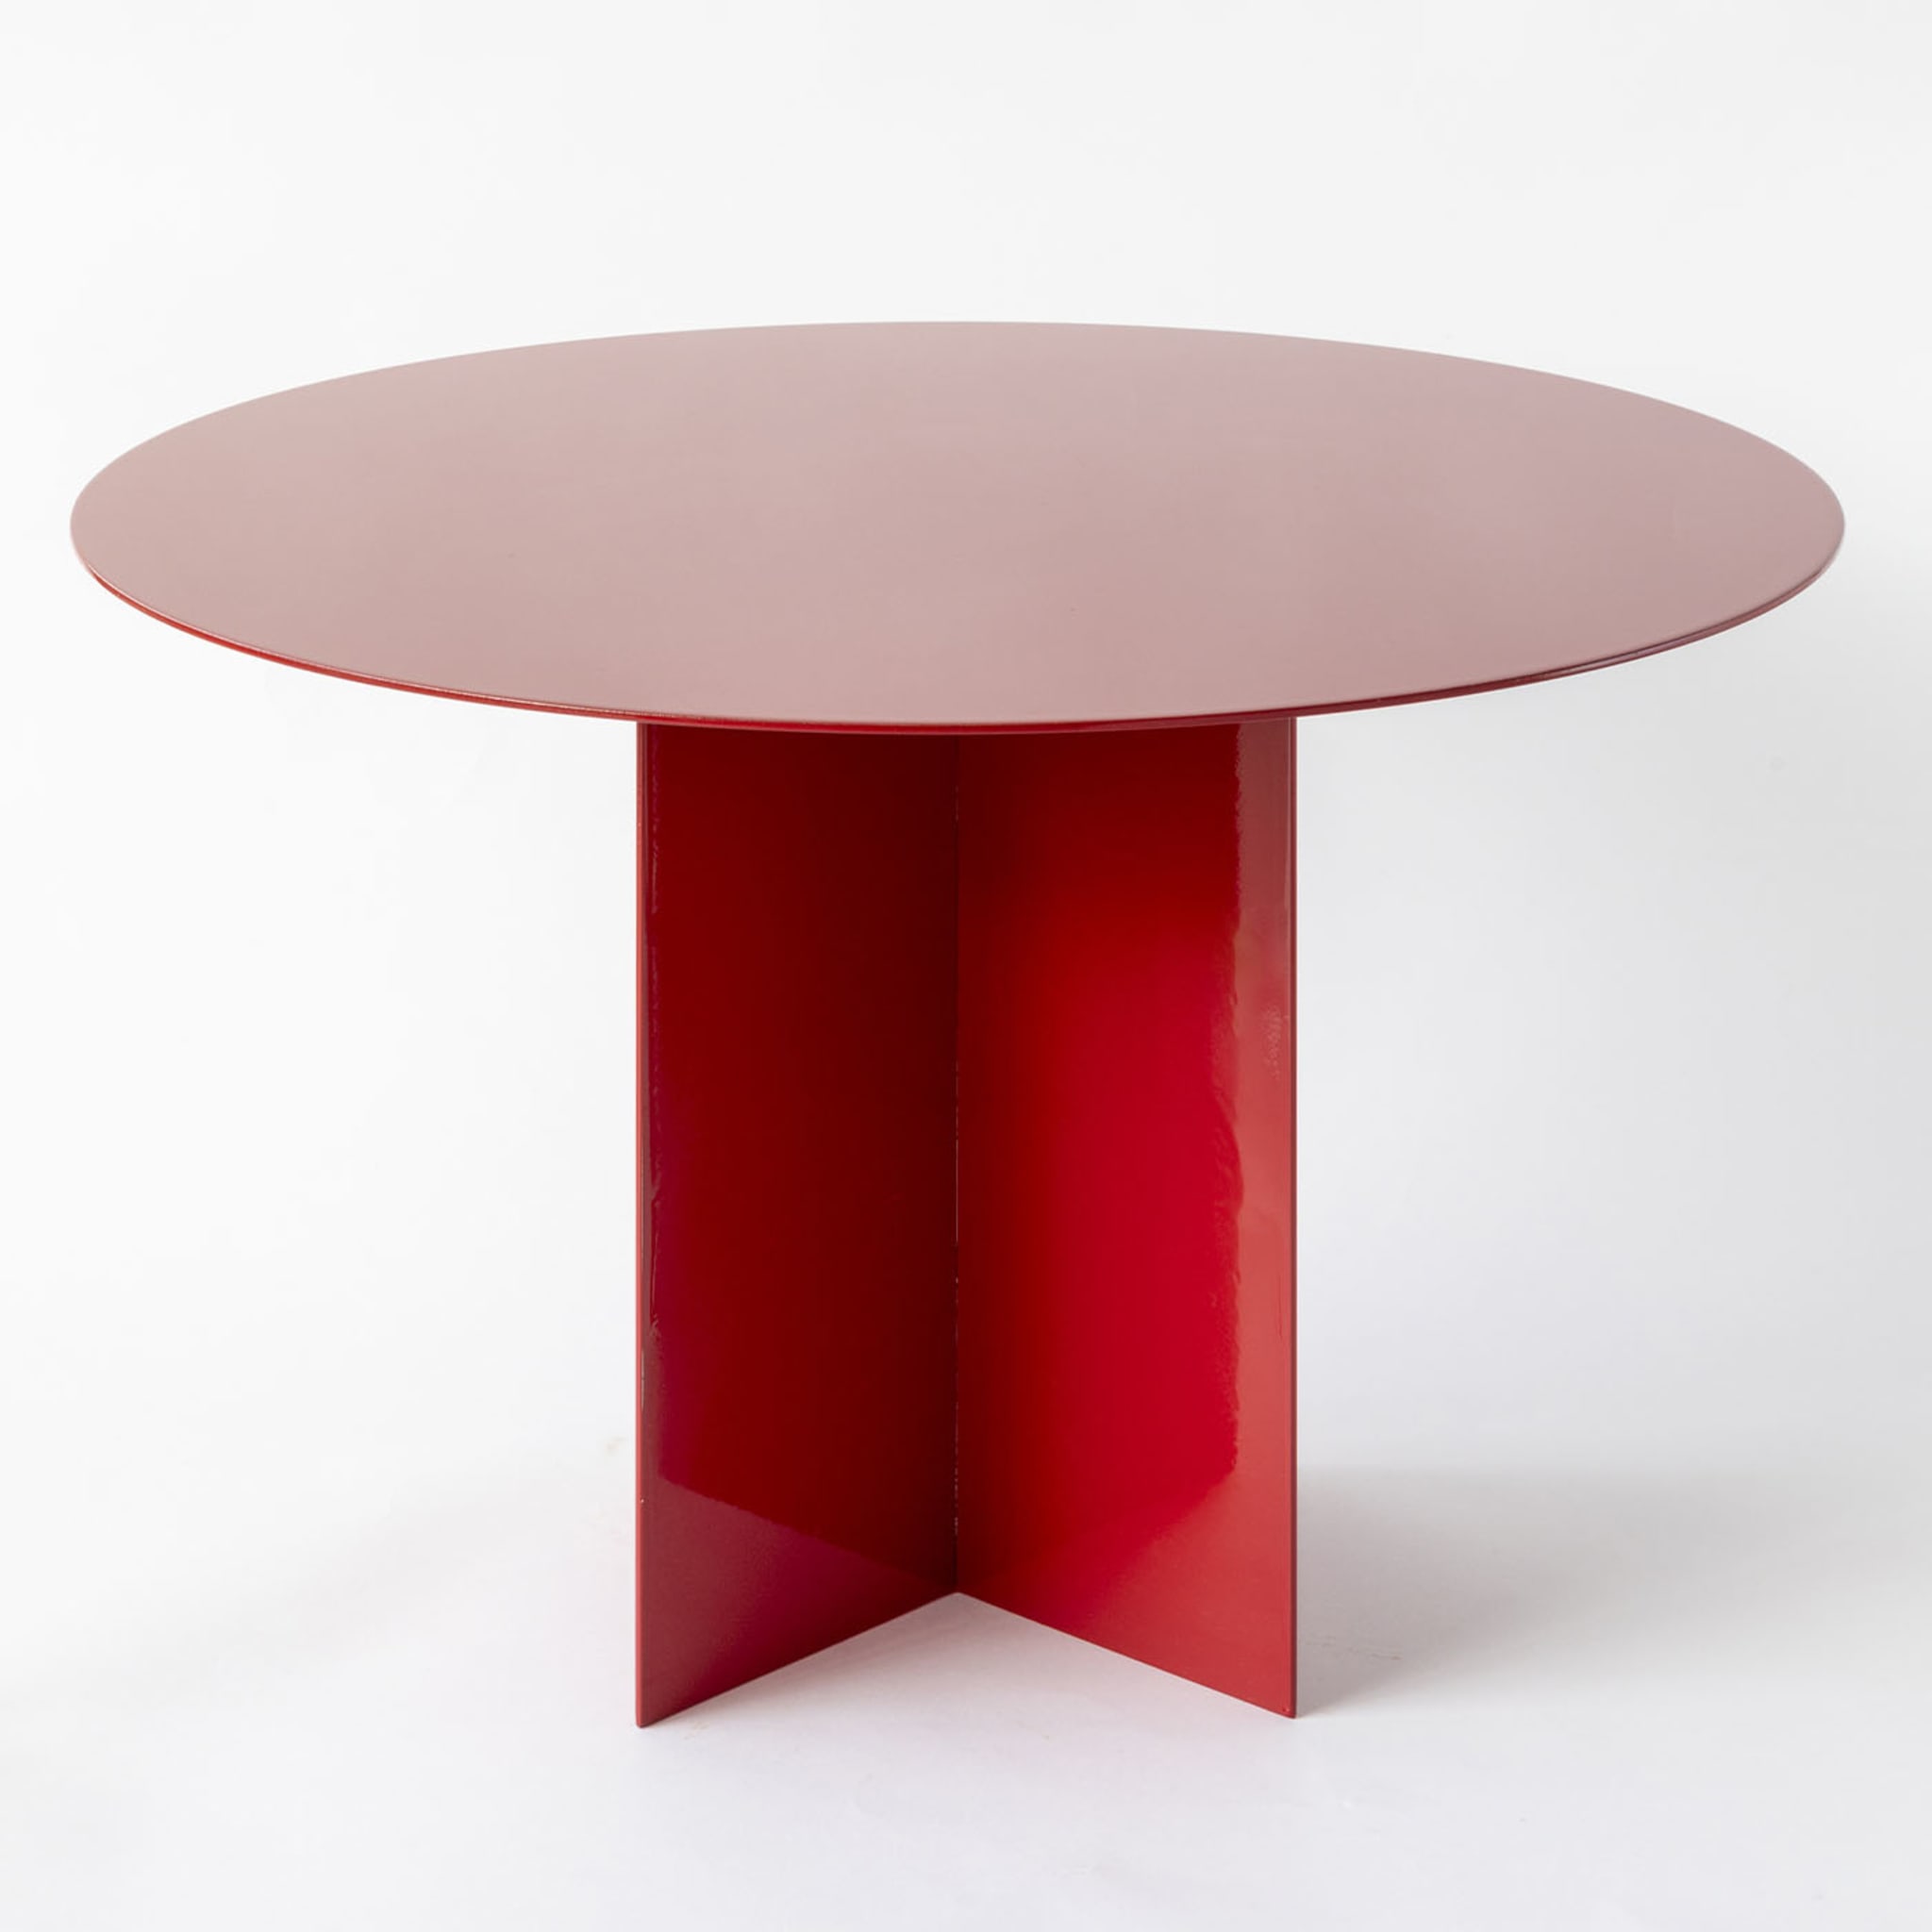 Across Large Red Side Table  - Alternative view 1